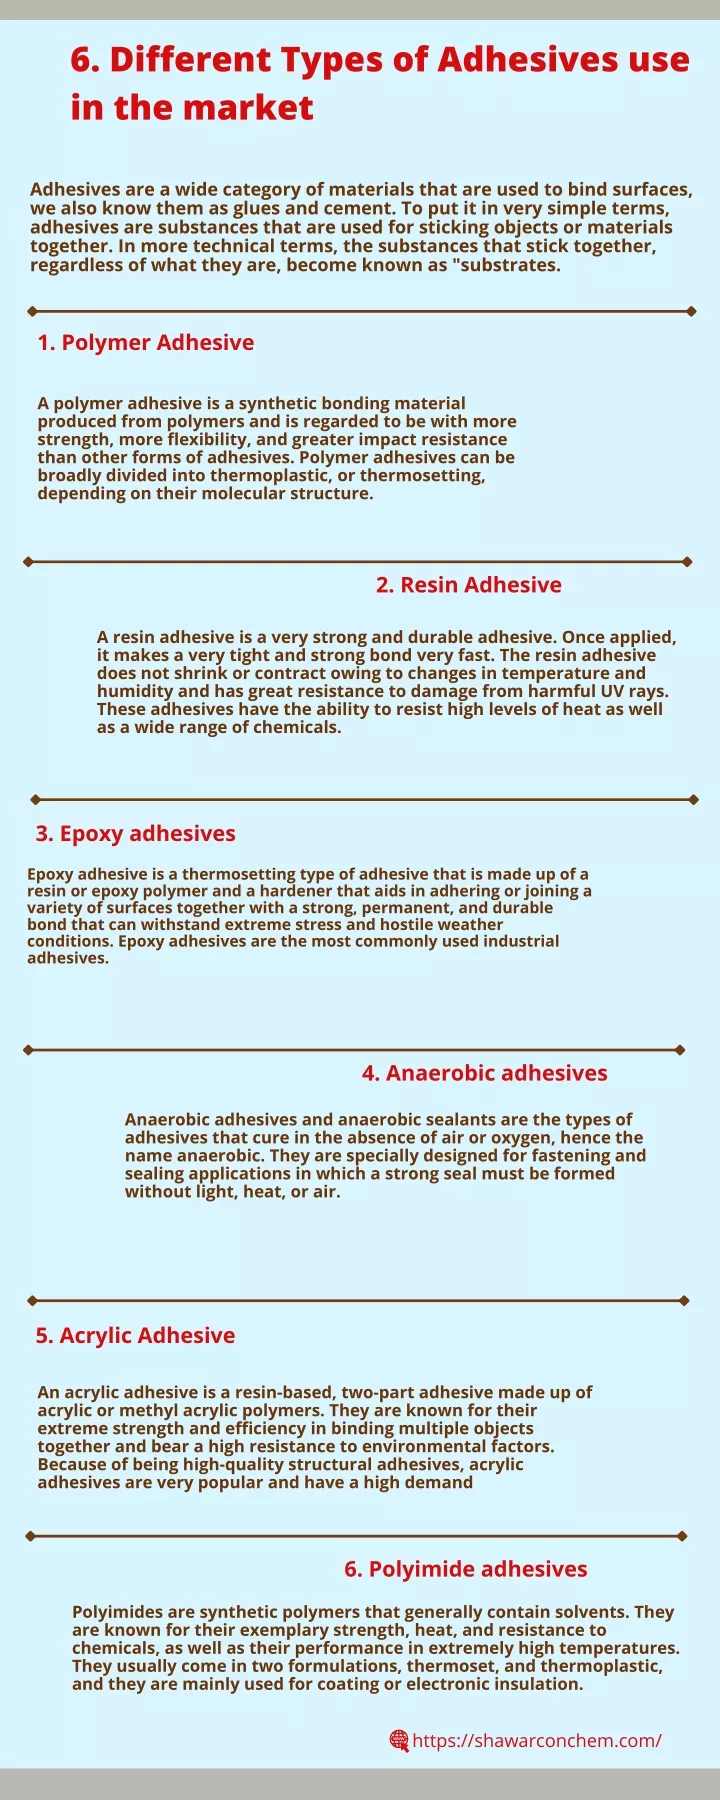 6 different types of adhesives use in the market